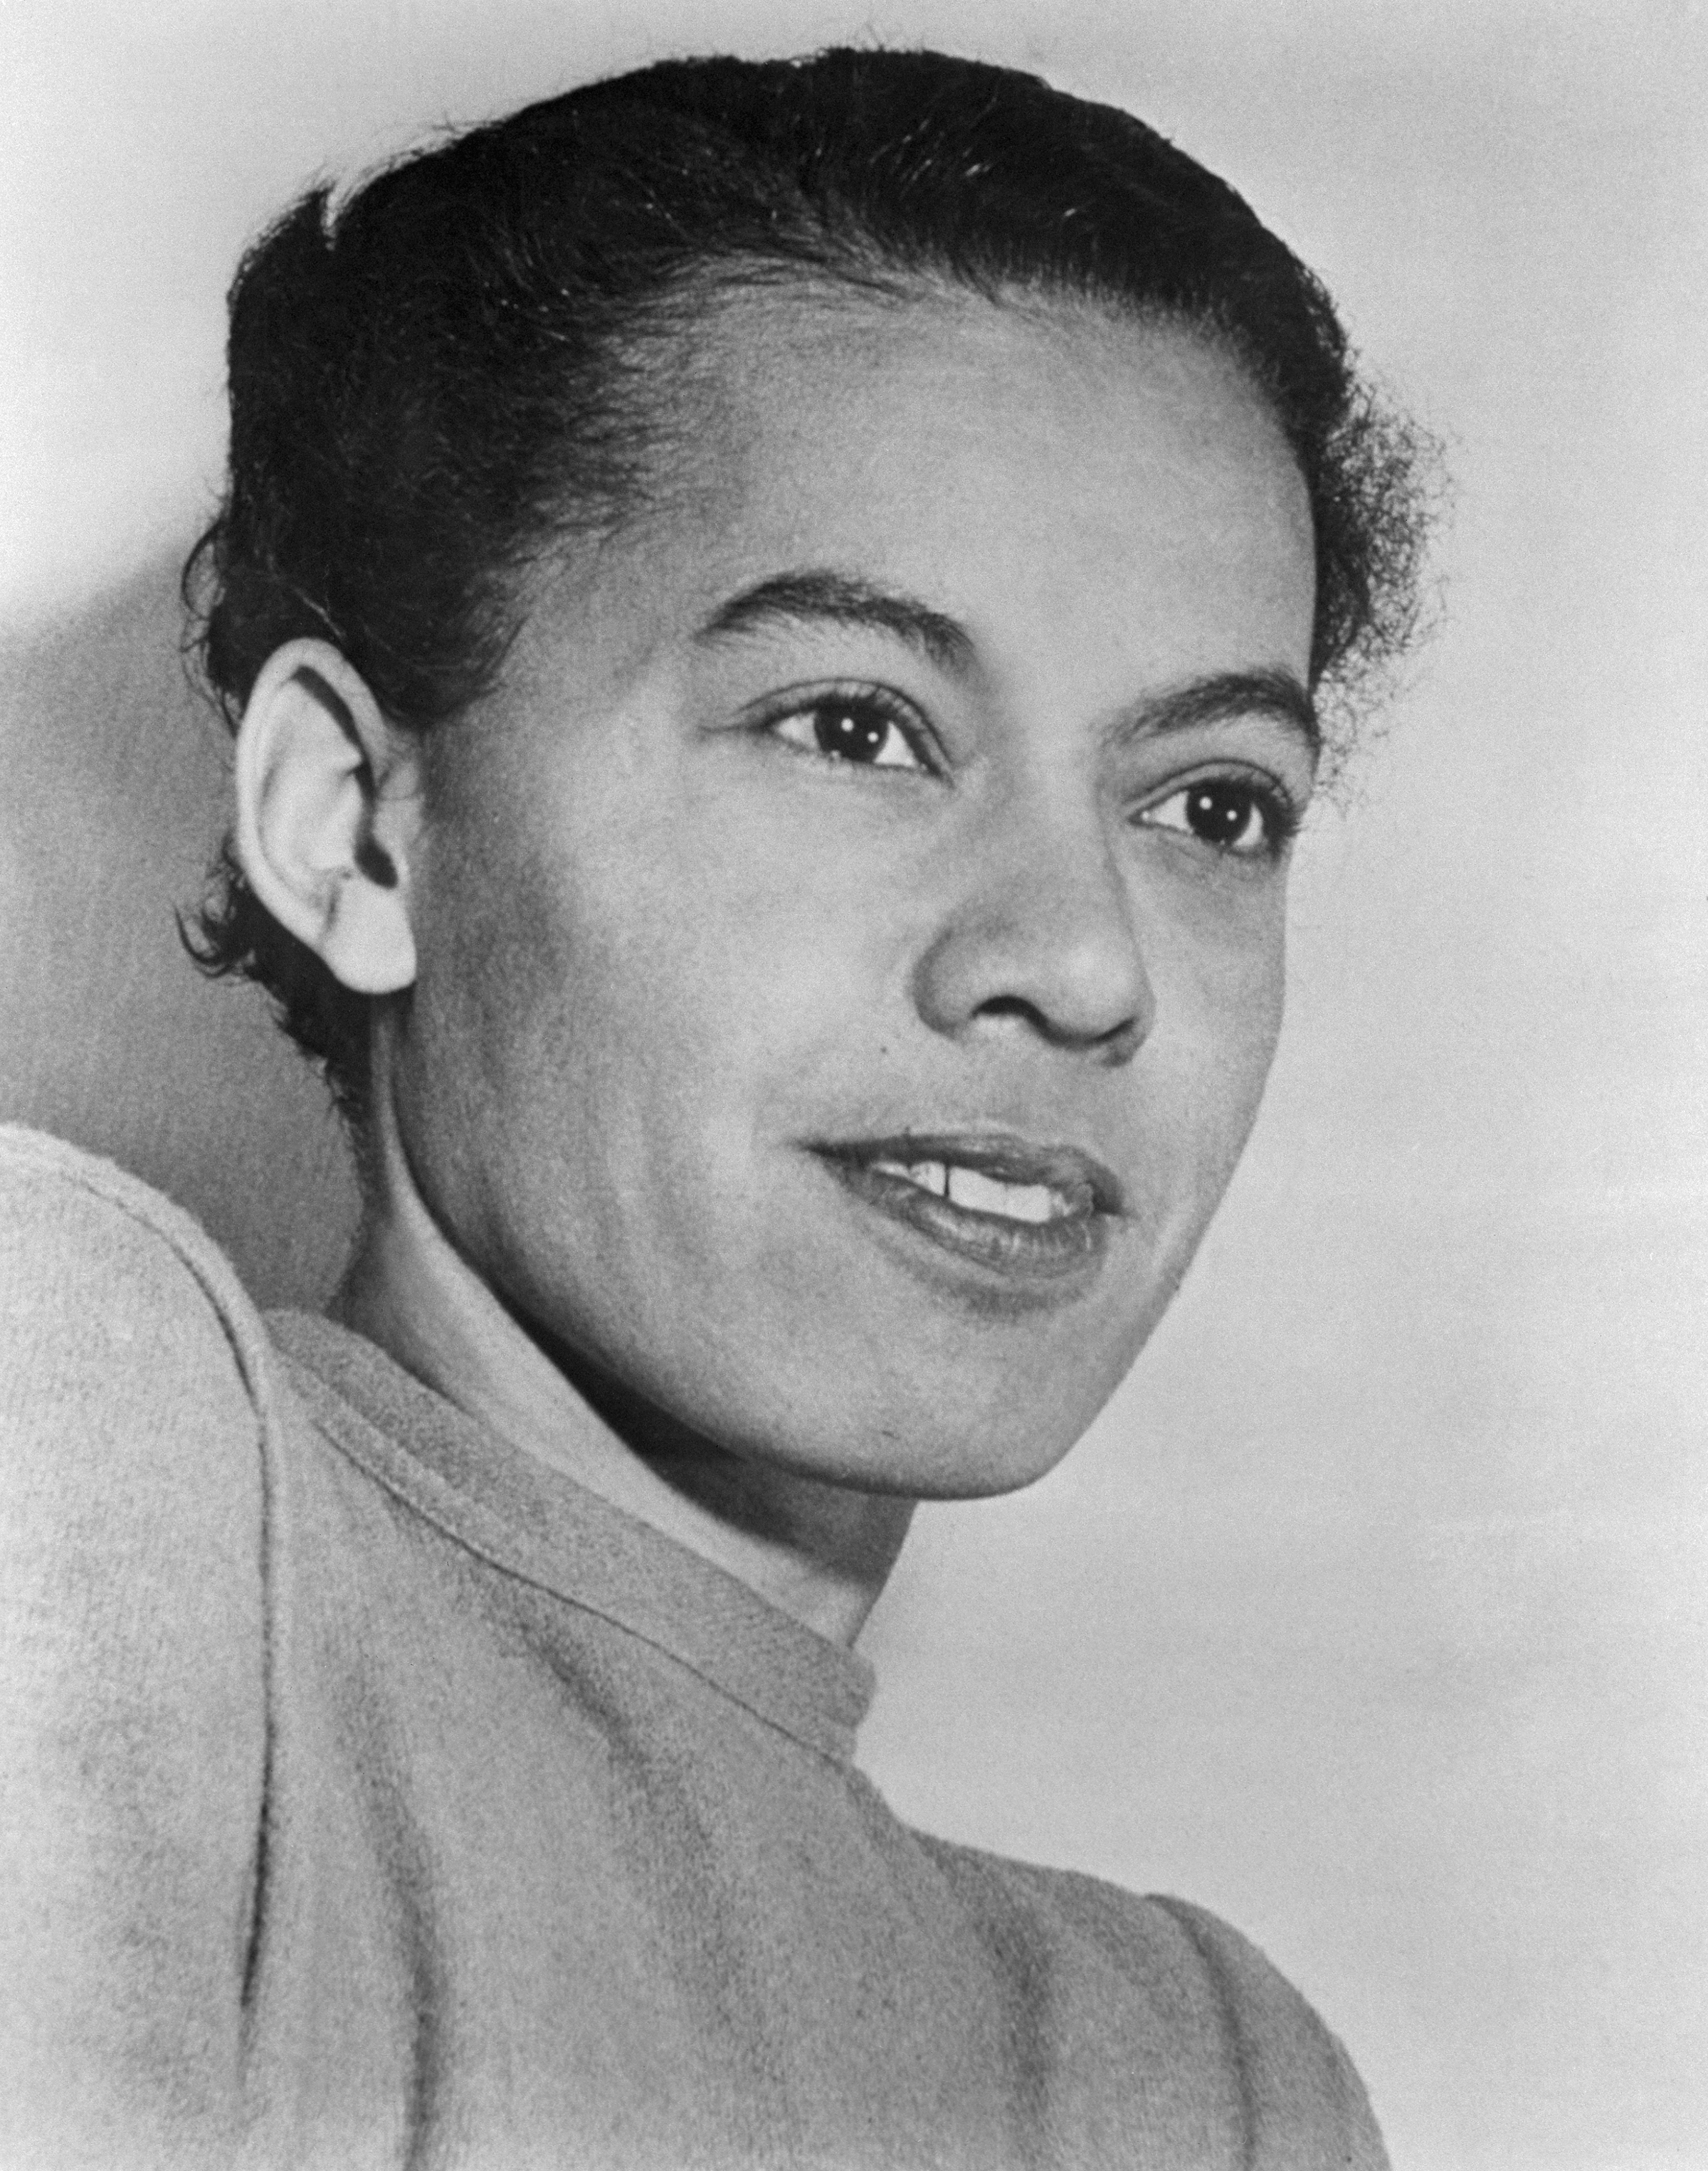 Pauli Murray was a leader in the struggle against racial discrimination. (Bettmann Archive/Getty Images)